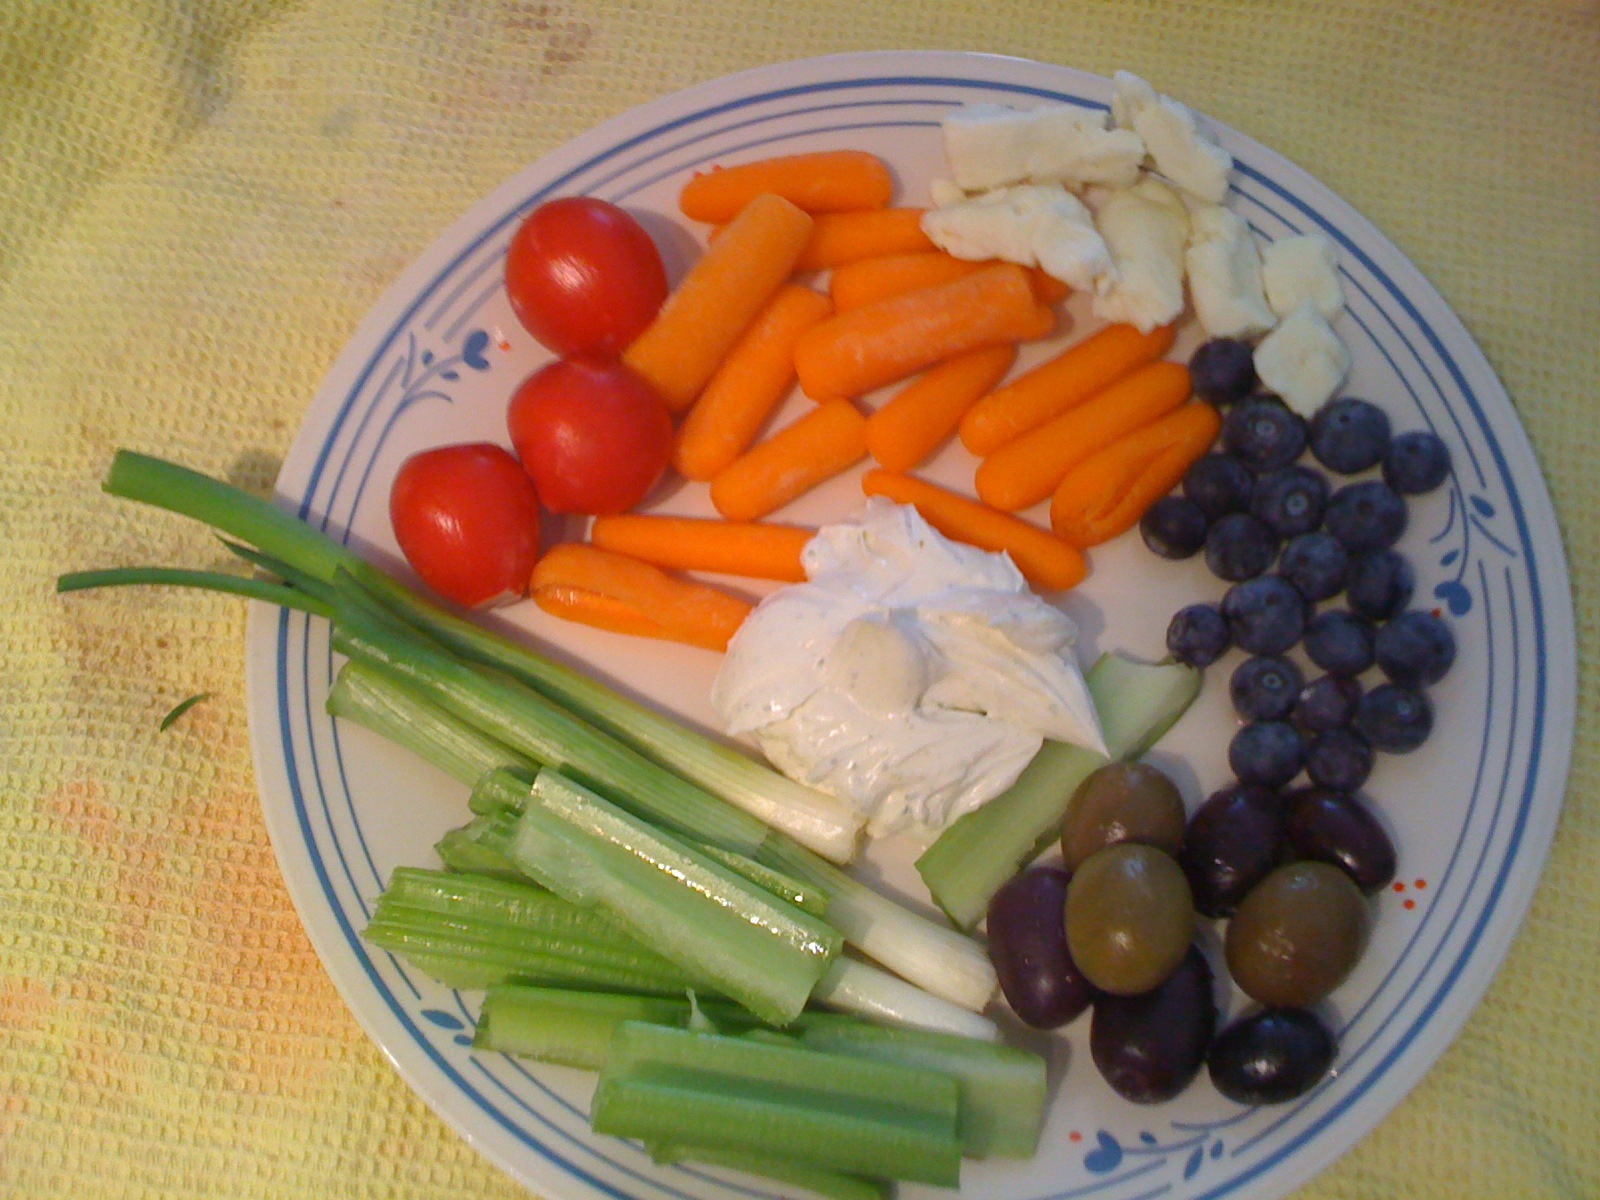 some carrots, celery, olives, and tomatoes on a plate